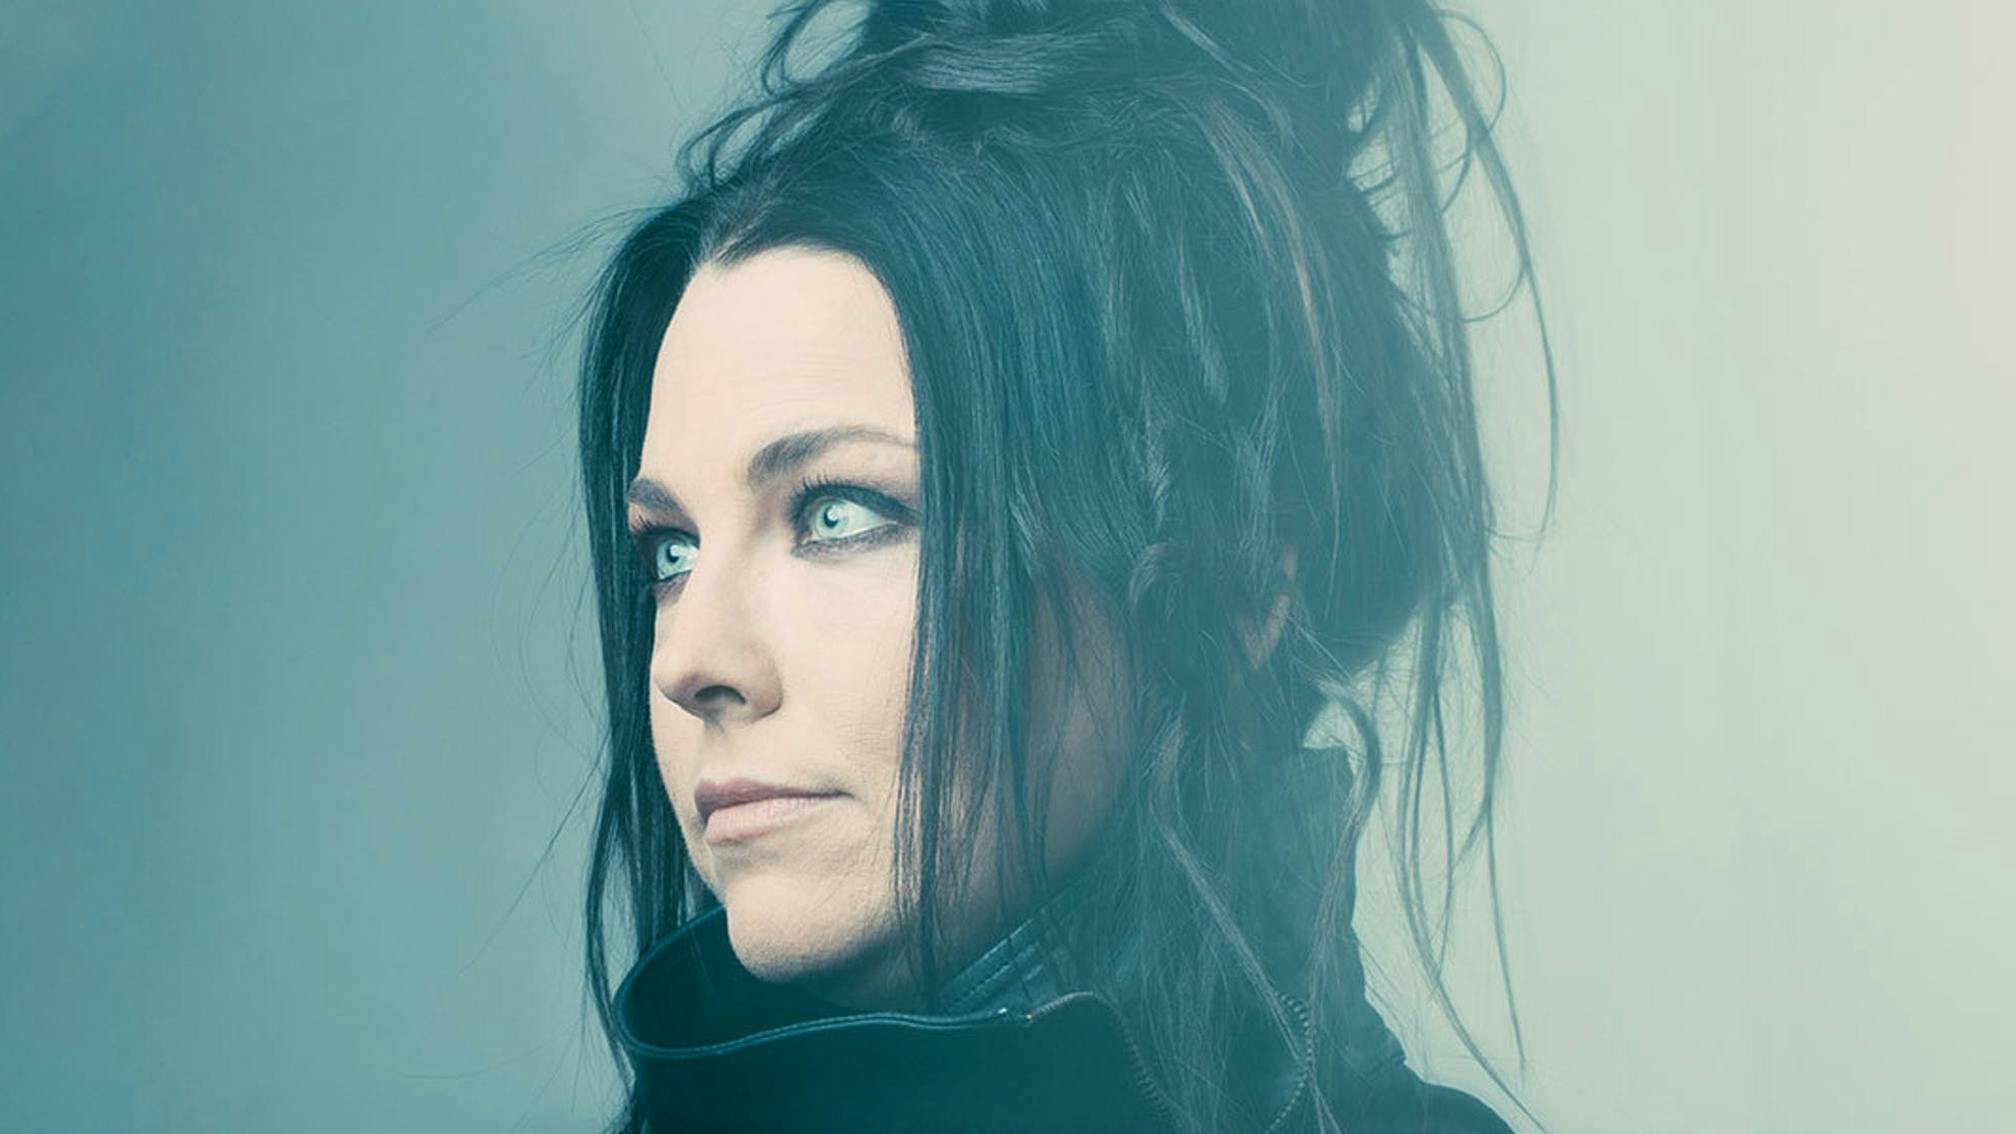 From Bring Me To Life to Chewbacca, here's 11 things we learned from Amy Lee's Reddit AMA